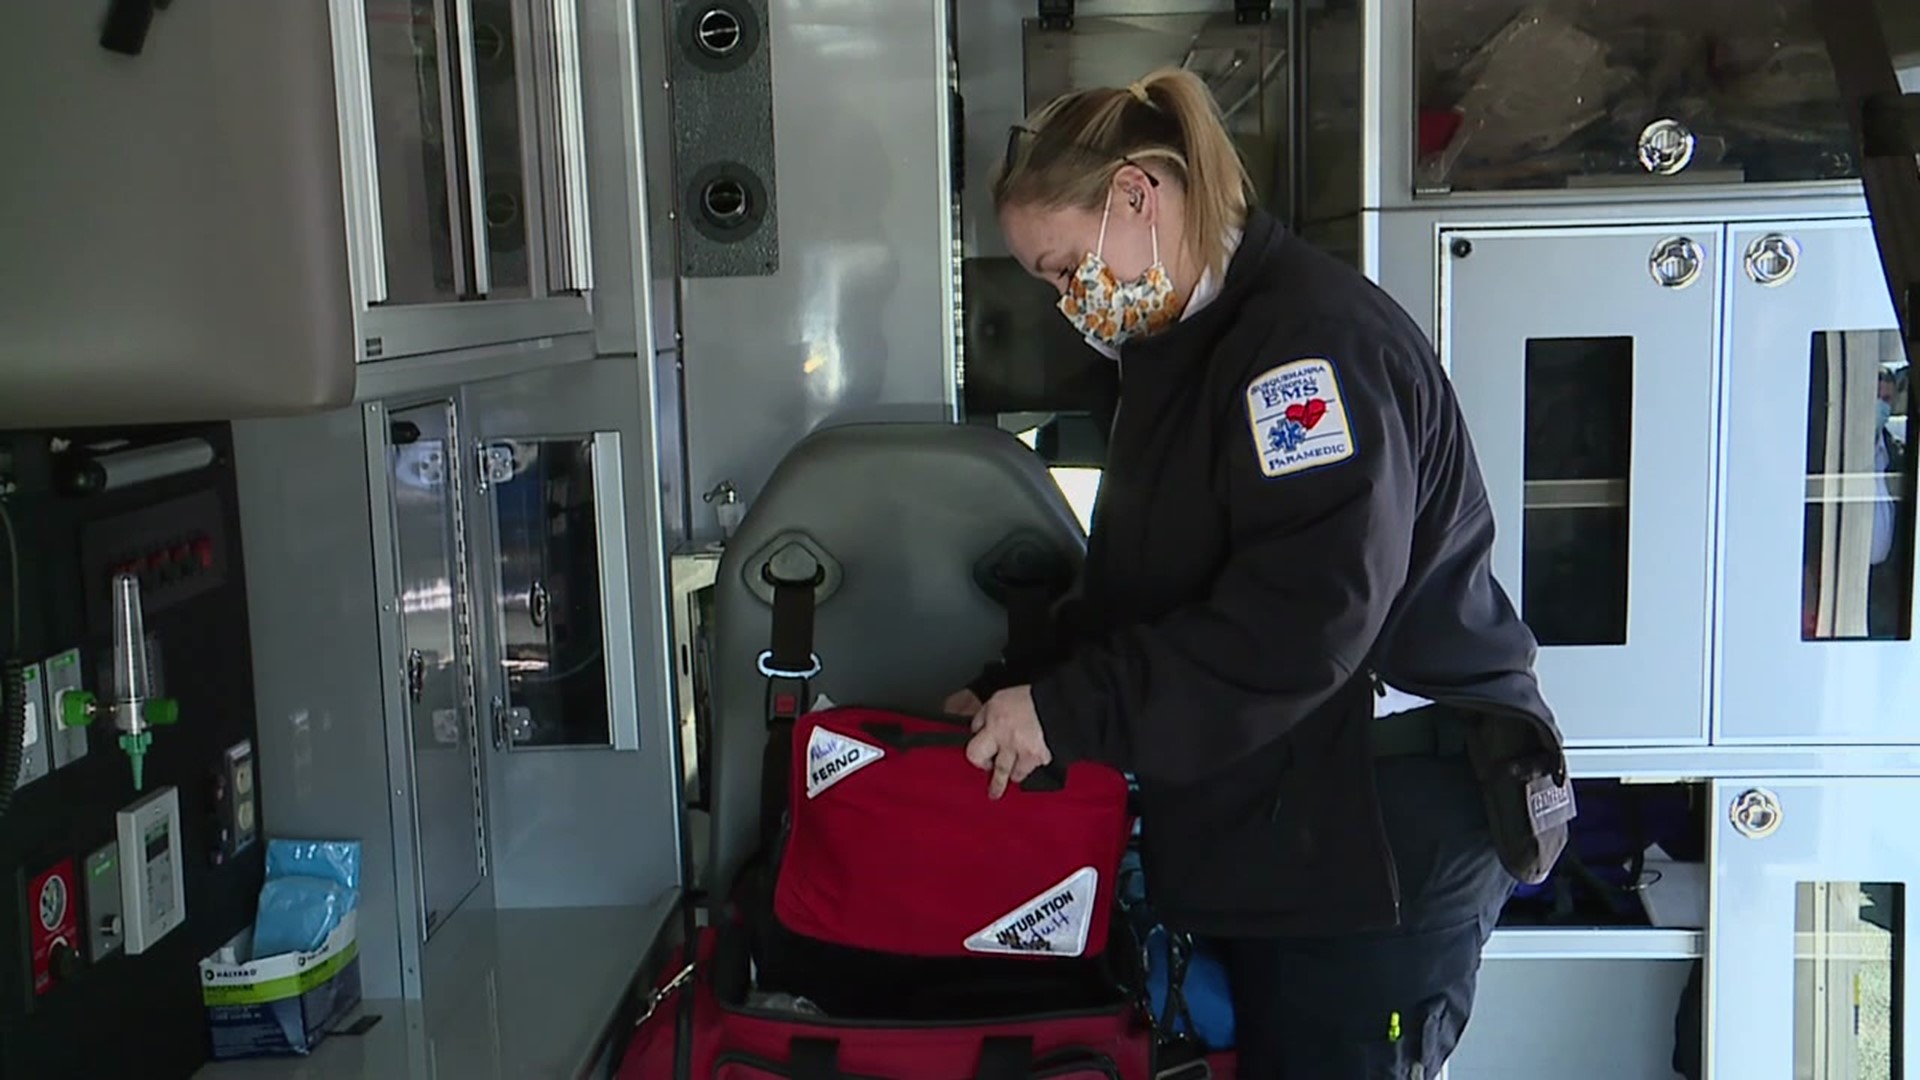 Susquehanna Regional EMS in Williamsport is looking to add folks to its workforce.